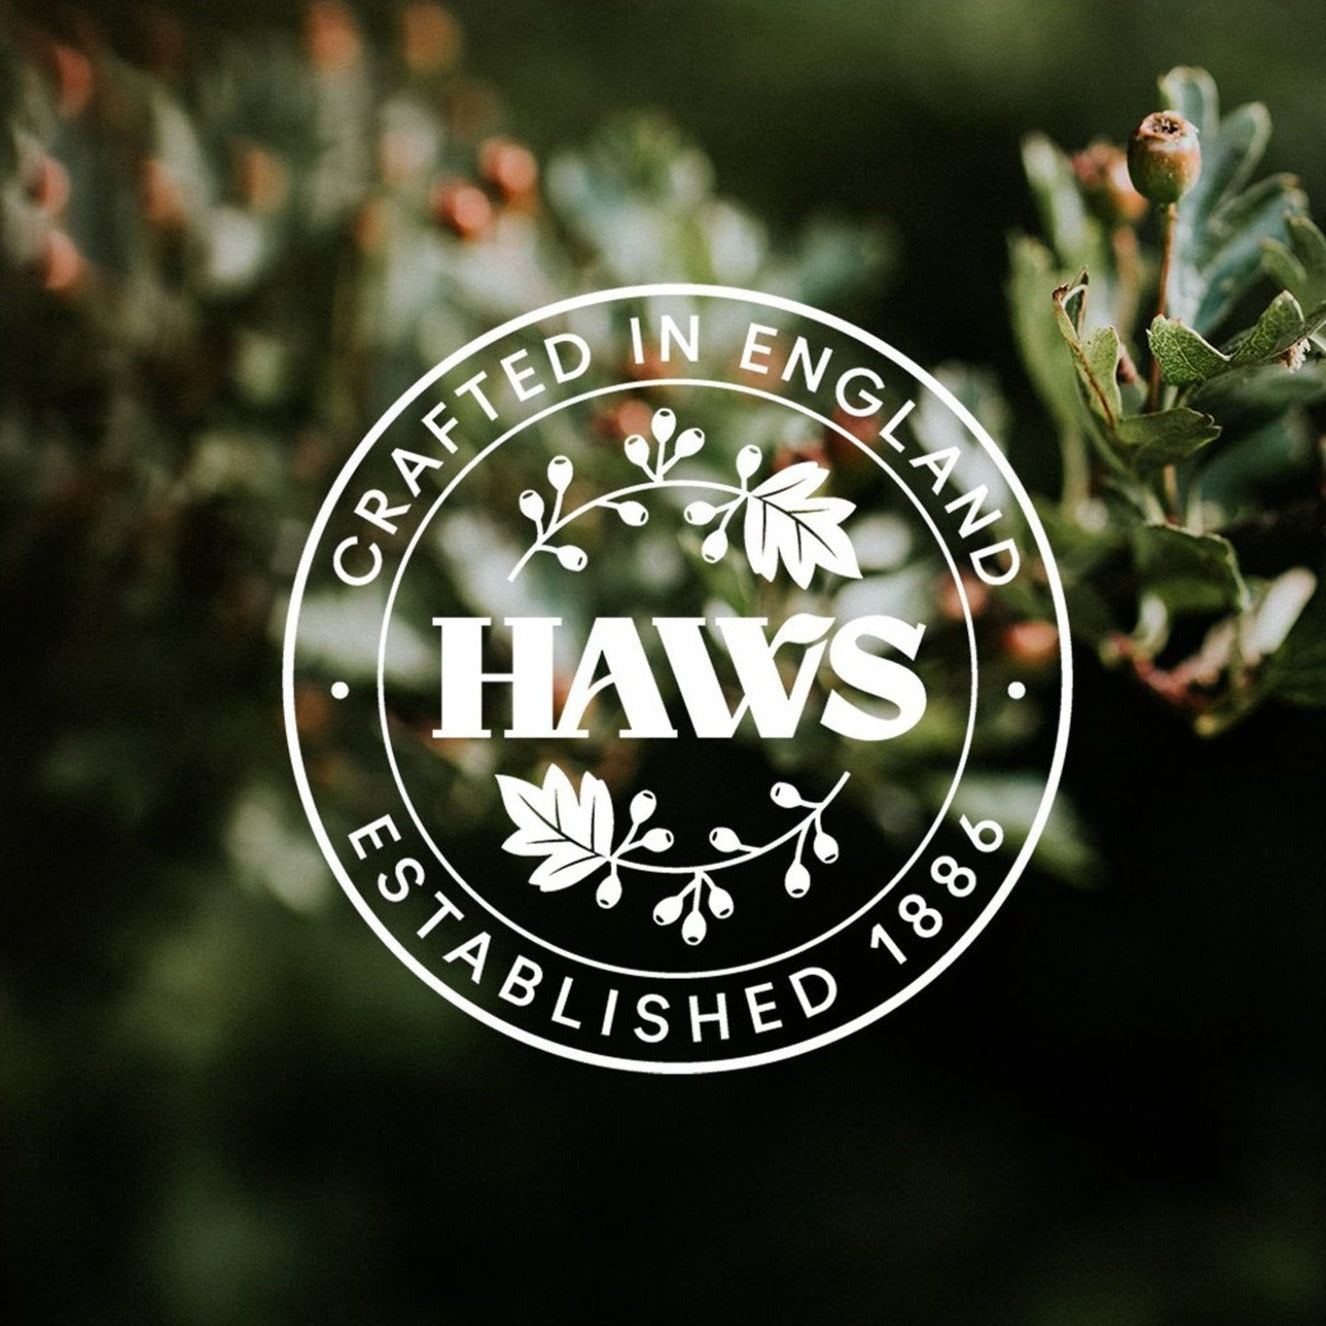 Established in 1886, Haws is the world’s oldest manufacturer of watering cans, and their products are as enduring as their reputation.